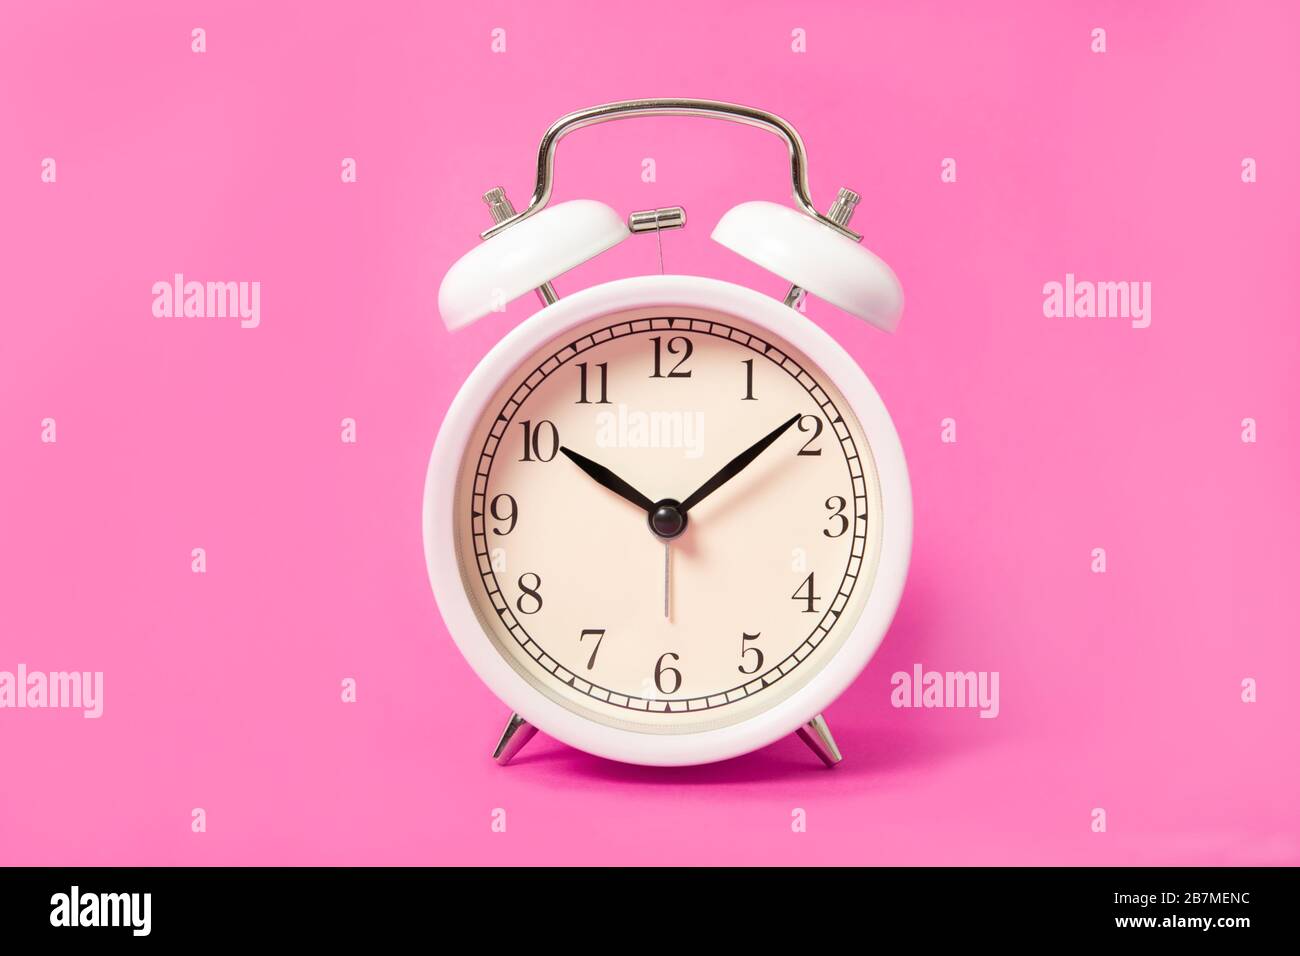 White alarm clock on a pink background. Stock Photo